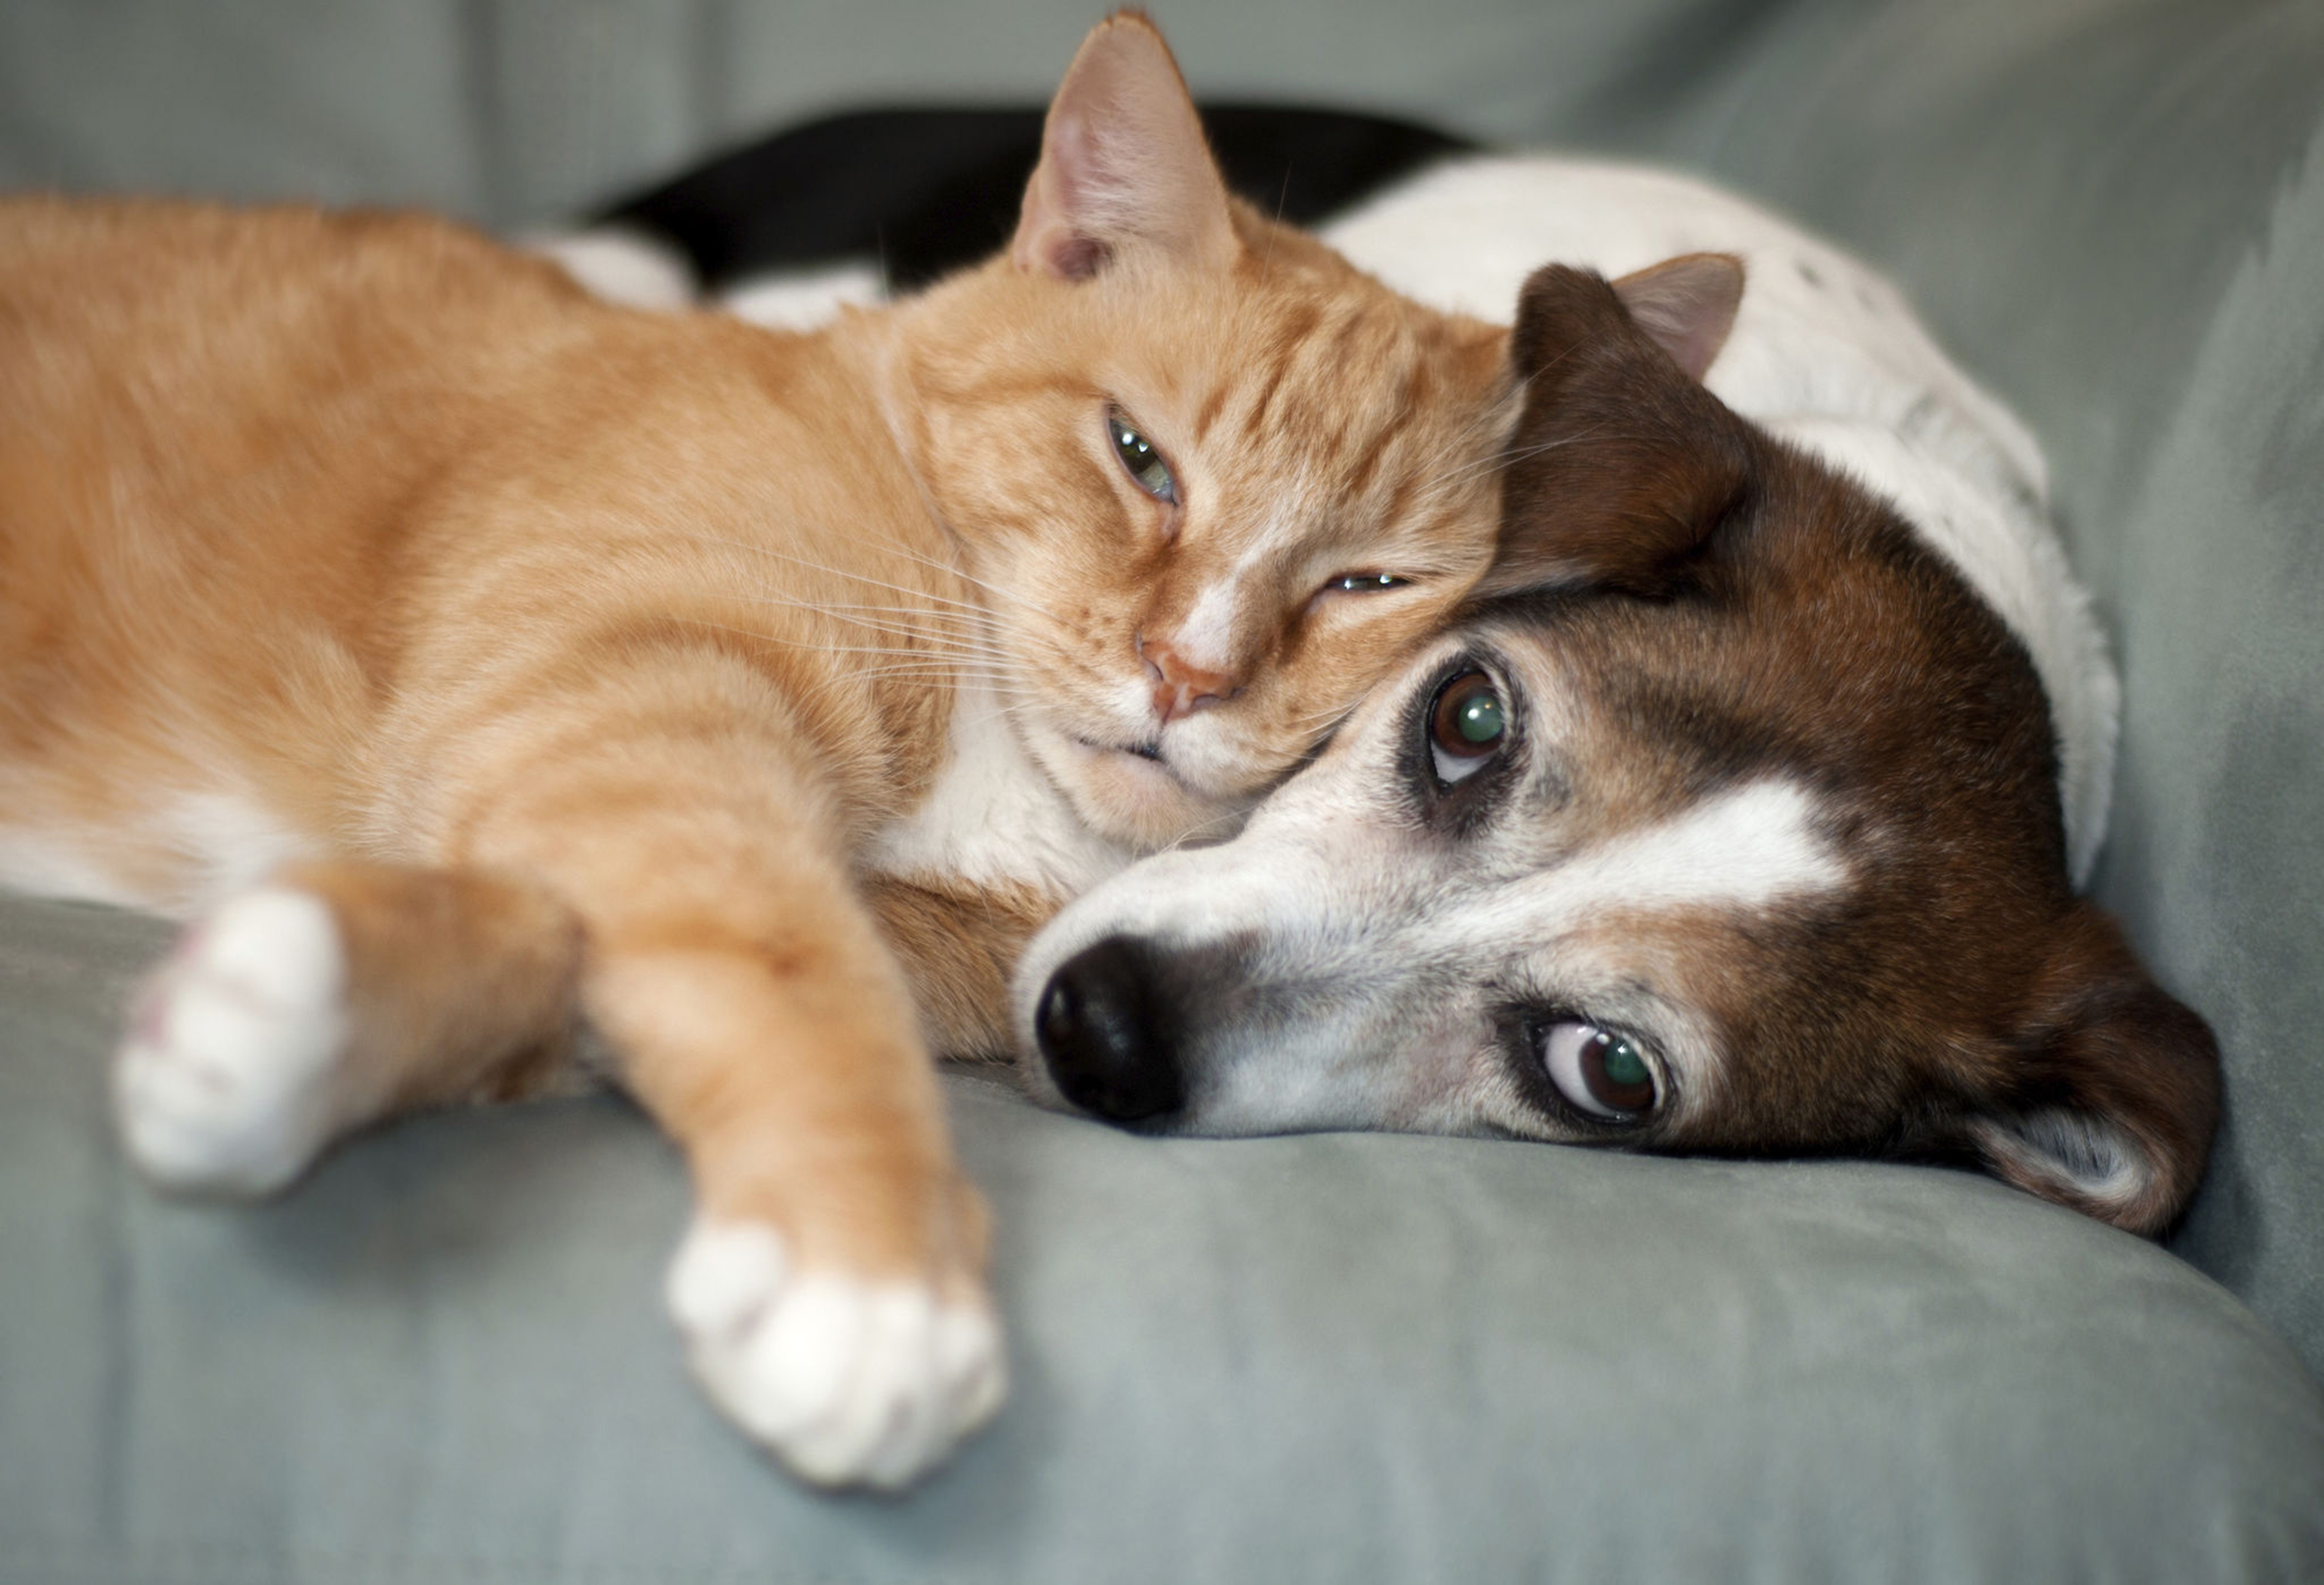 Yellow cat and brown and white dog cuddled together on a sofa